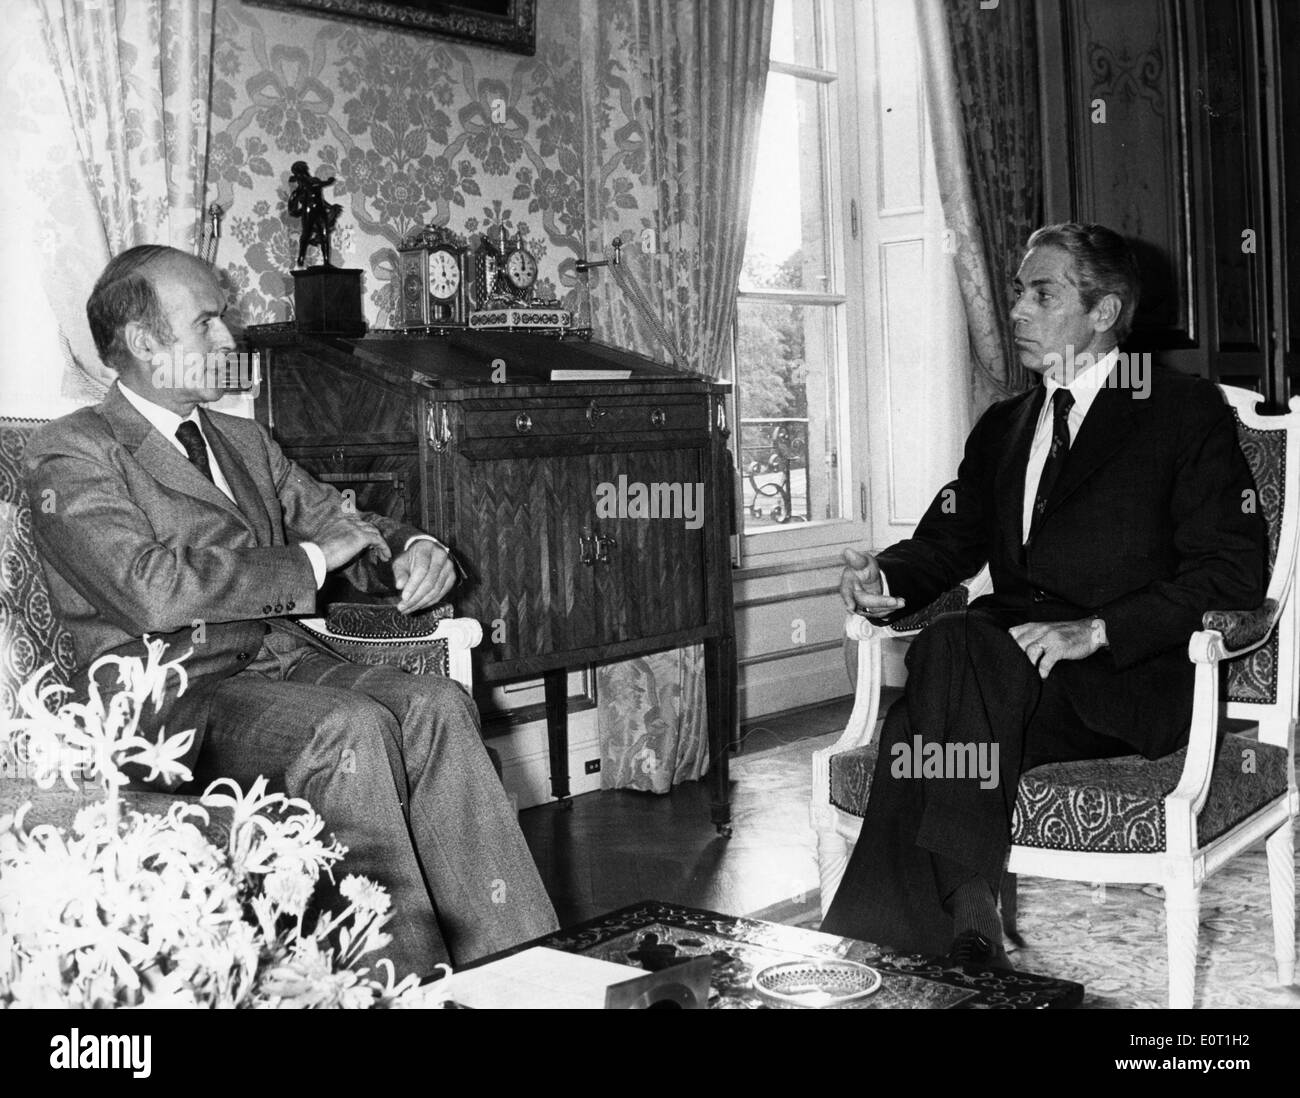 Robert Fabre meets with President Valery Giscard d'Estaing Stock Photo